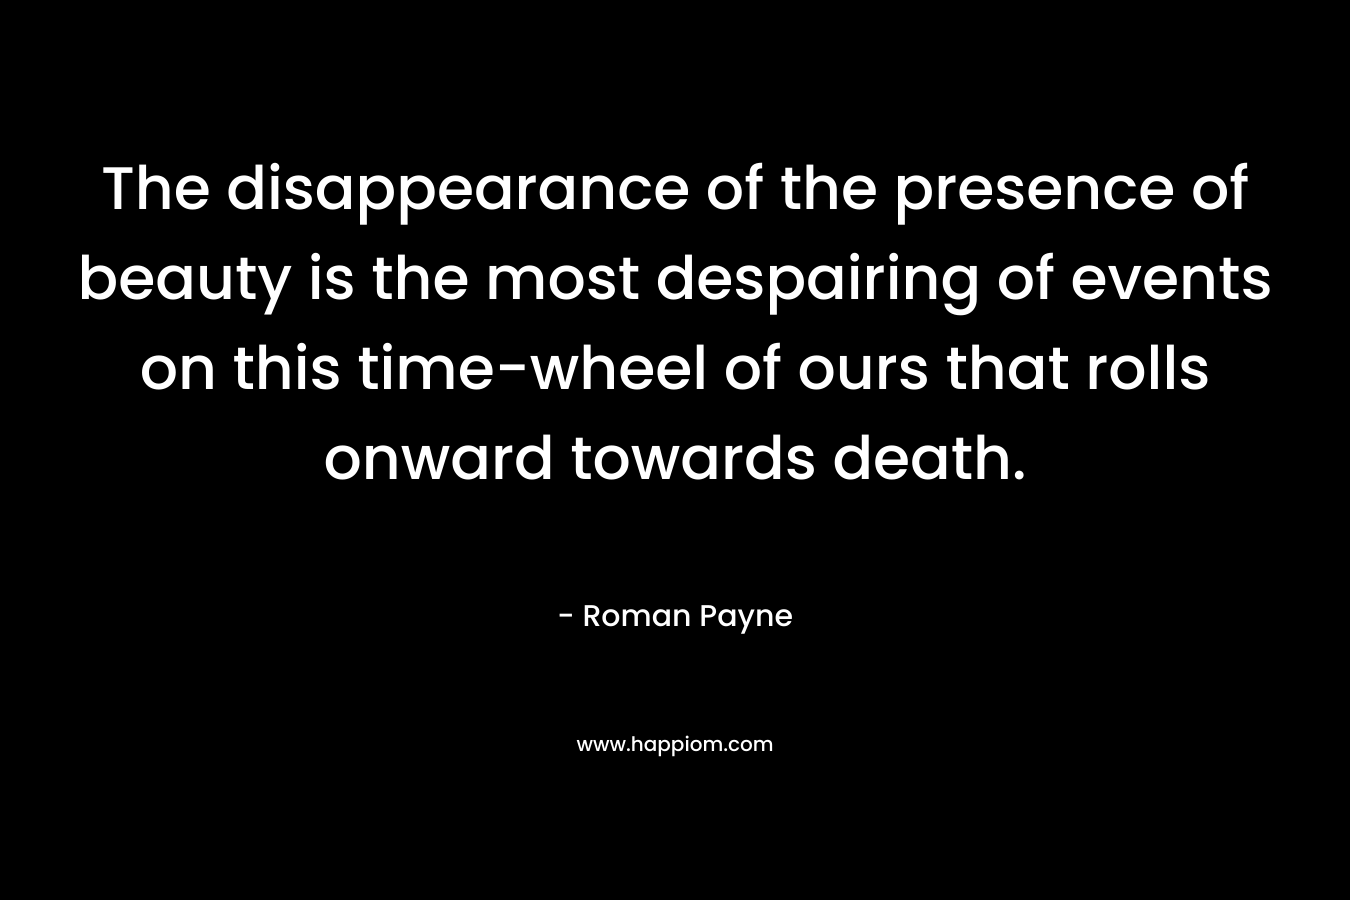 The disappearance of the presence of beauty is the most despairing of events on this time-wheel of ours that rolls onward towards death.